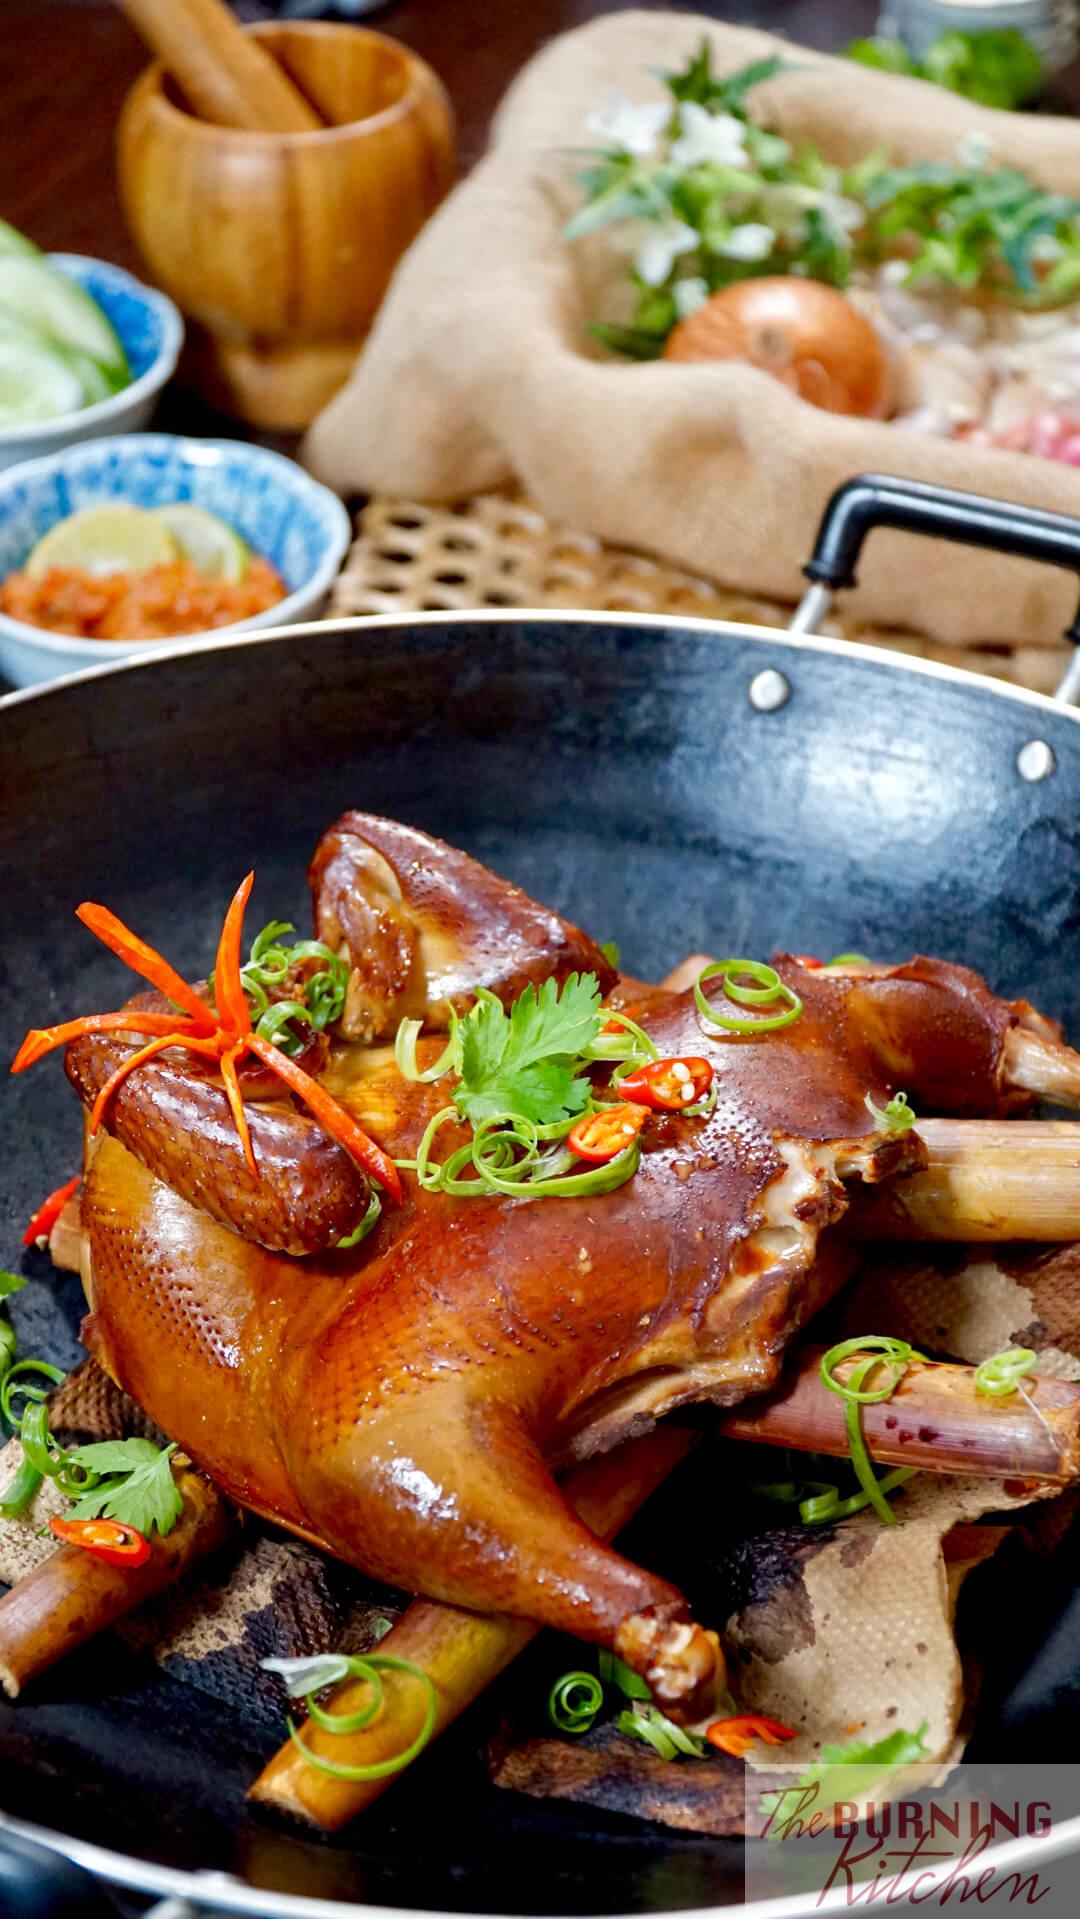 Chicken that is smoked to golden brown perfection on the outside, juicy and tender on the inside. The flavours of the sugarcane and brown sugar are infused into the chicken through the smoking process, resulting in a rich, layered flavour profile!